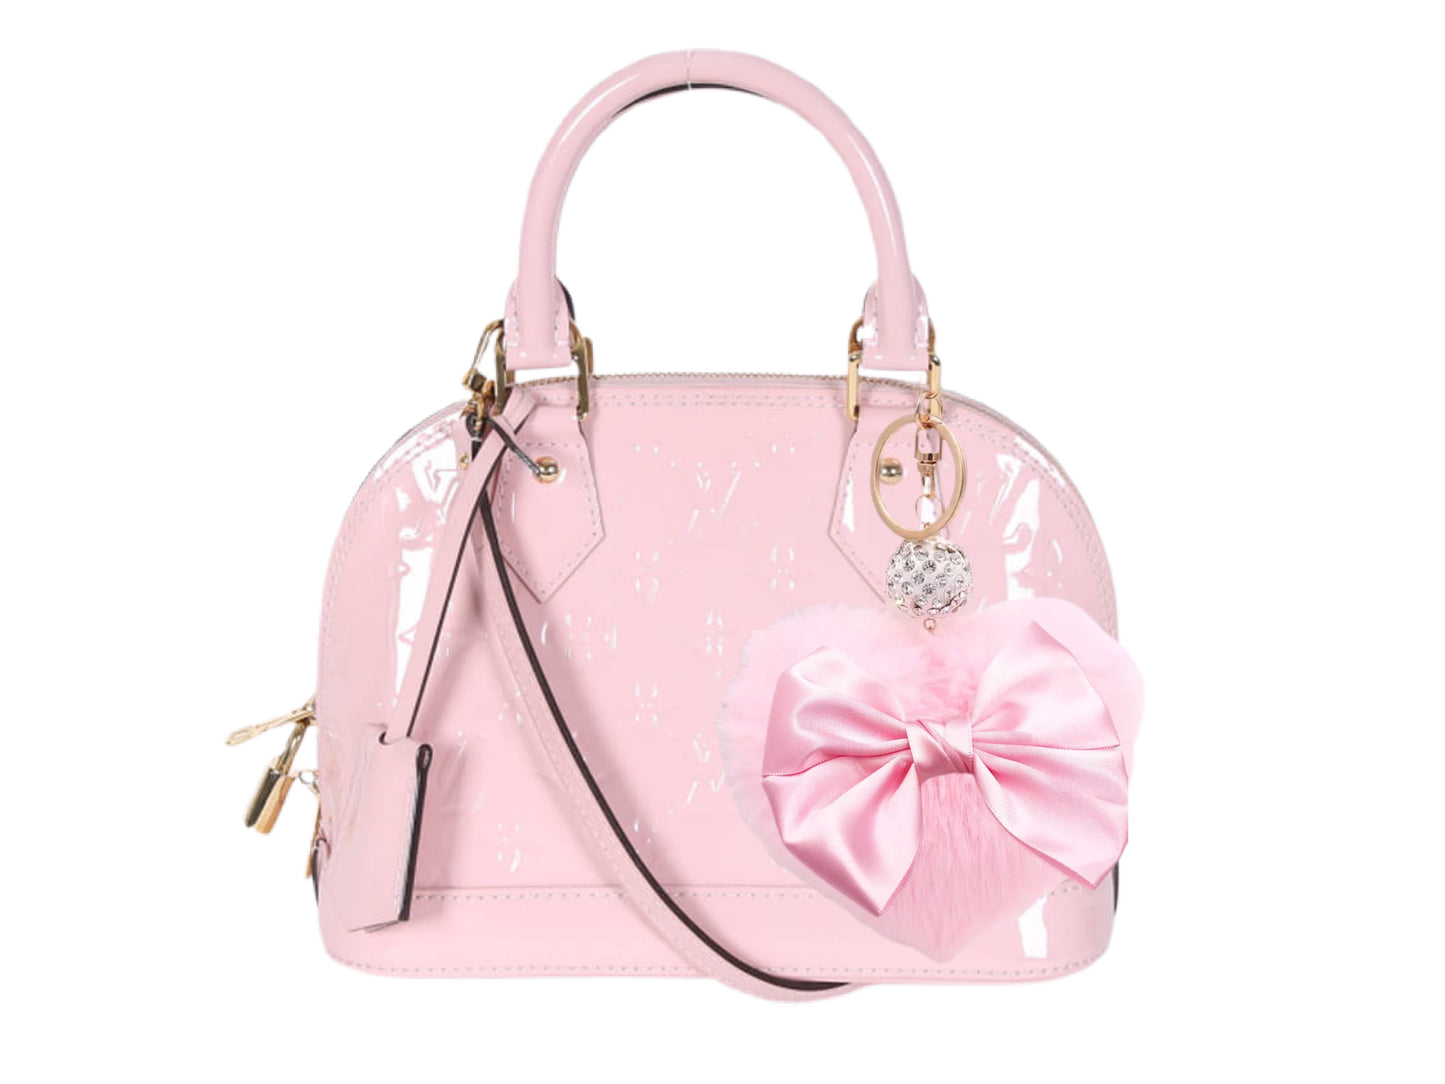 Pink Silk Bow Luxe Heart Purse Charm